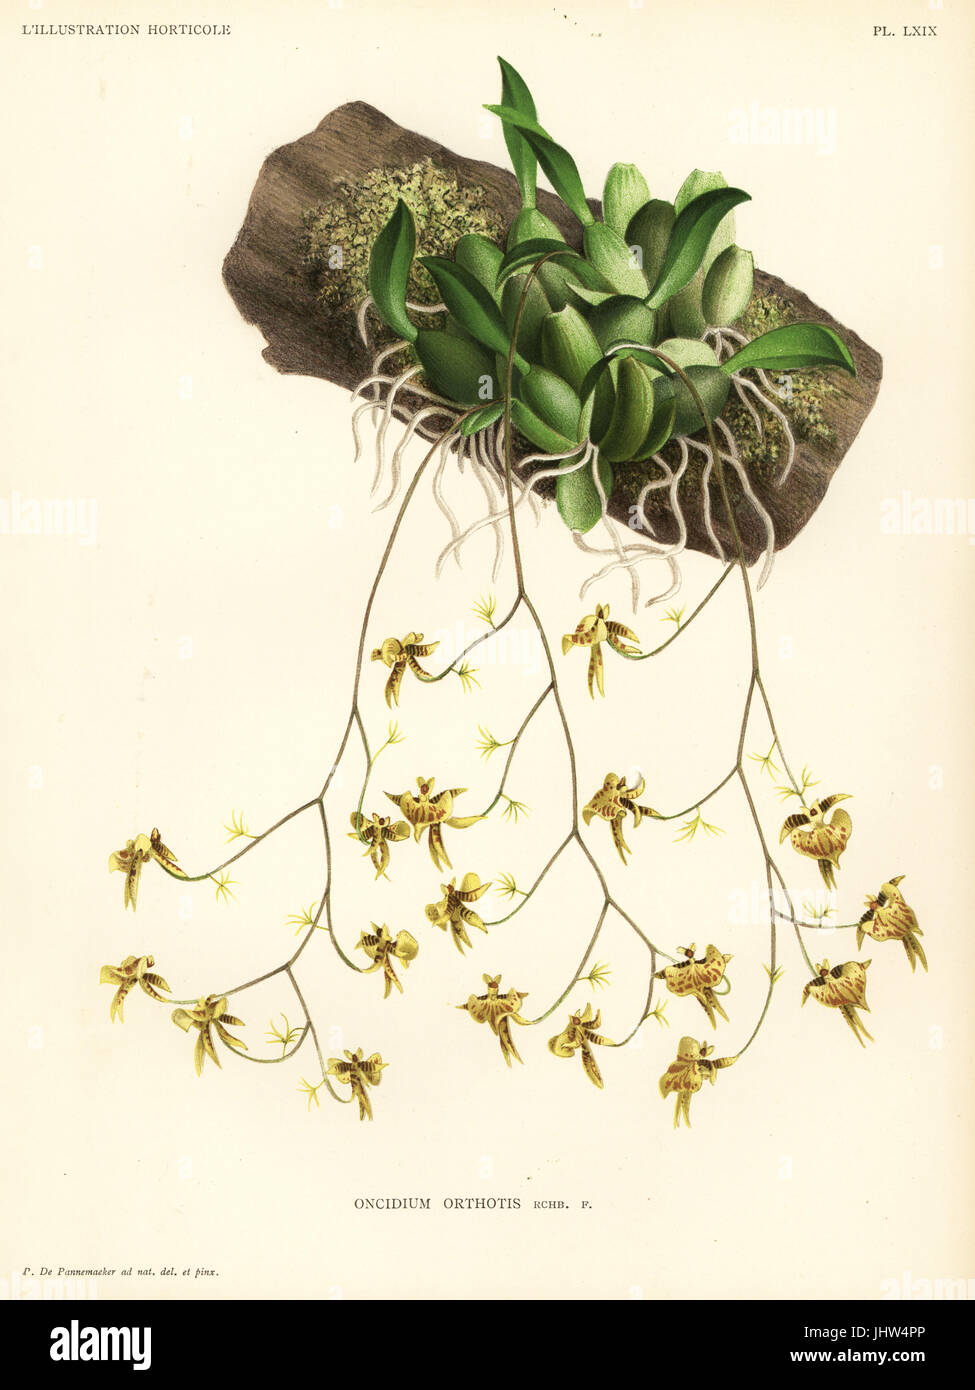 Oncidium orthotis orchid. Drawn and chromolithographed by Pieter de Pannemaeker from Jean Linden's l'Illustration Horticole, Brussels, 1888. Stock Photo